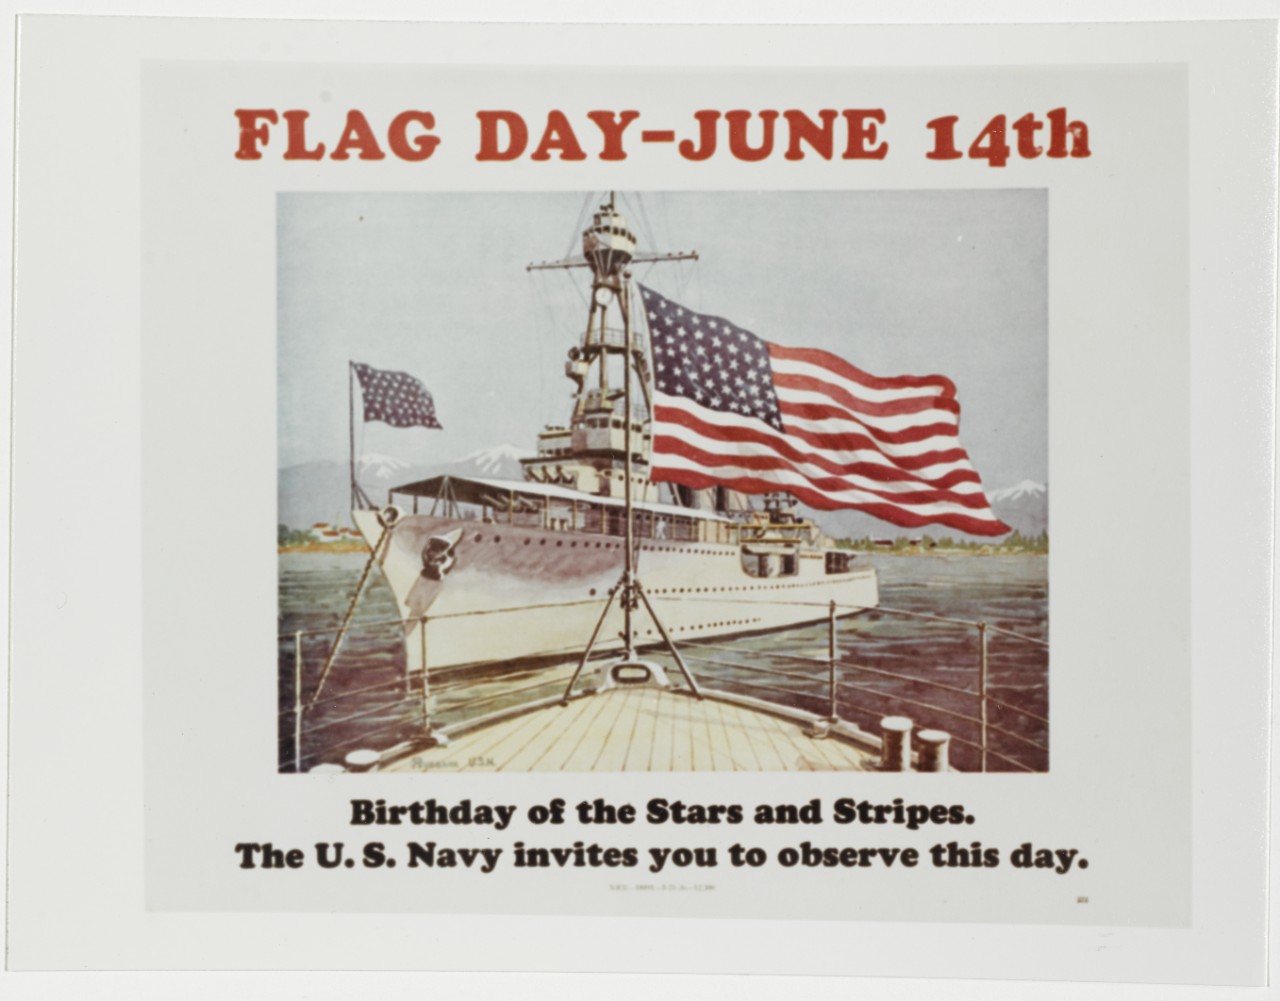 Navy Poster. "Flag Day- June 14th. Birthday of the Stars and Stripes"